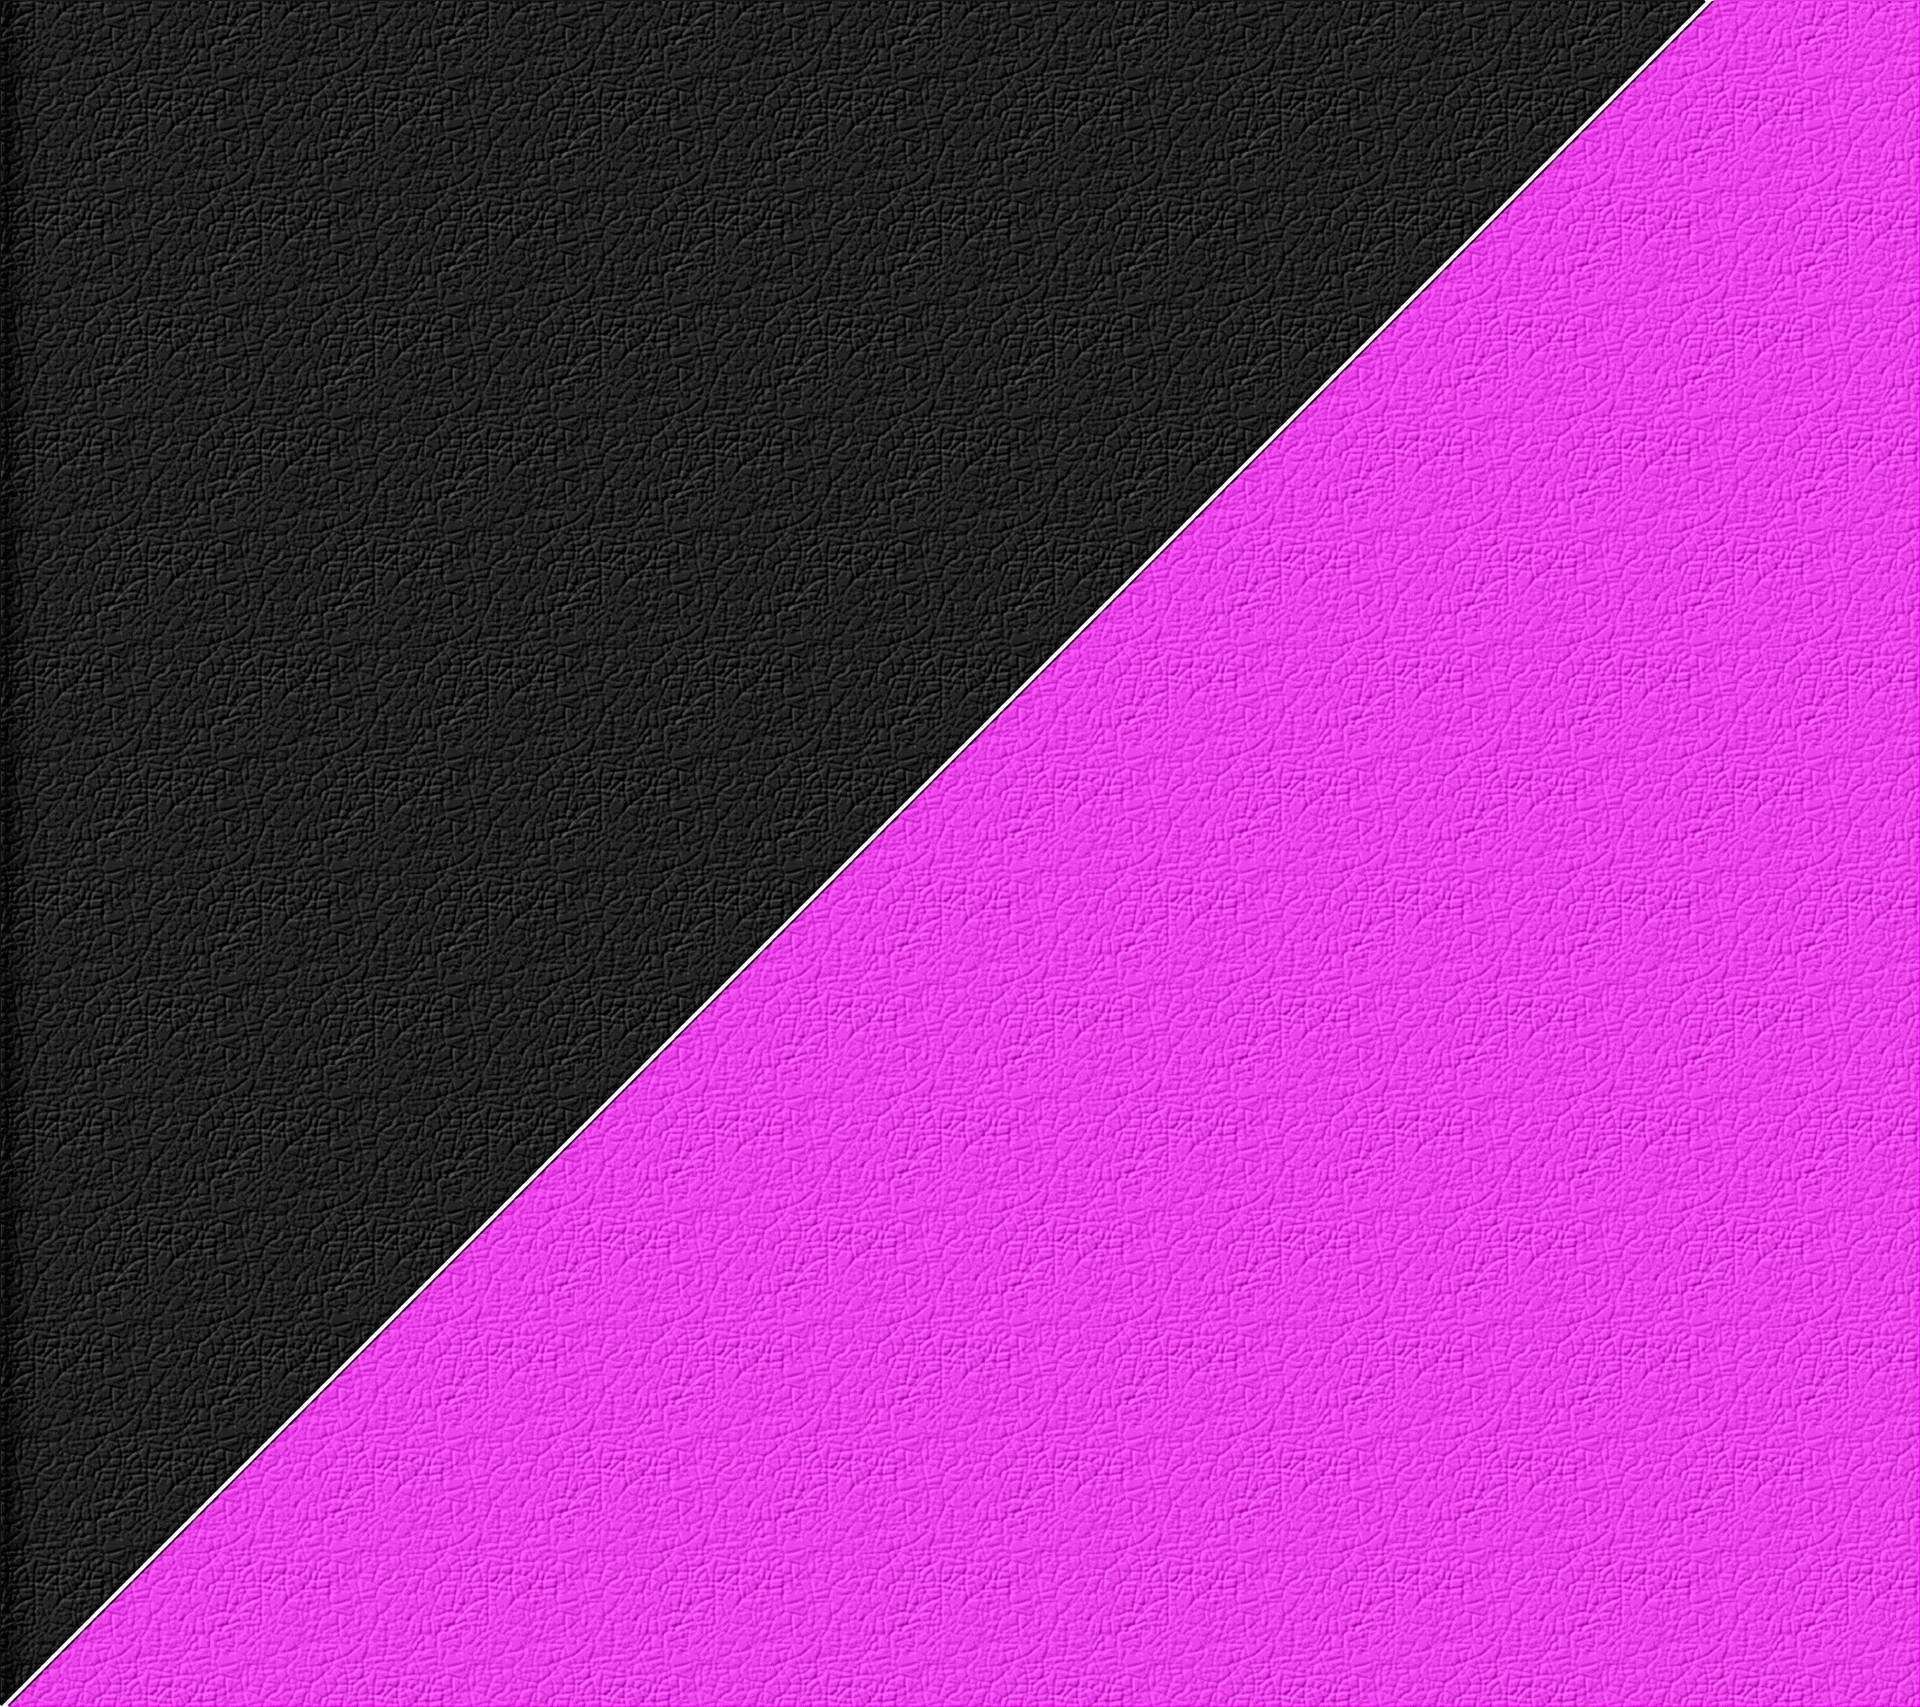 Black And Pink Aesthetic Leather Texture Background